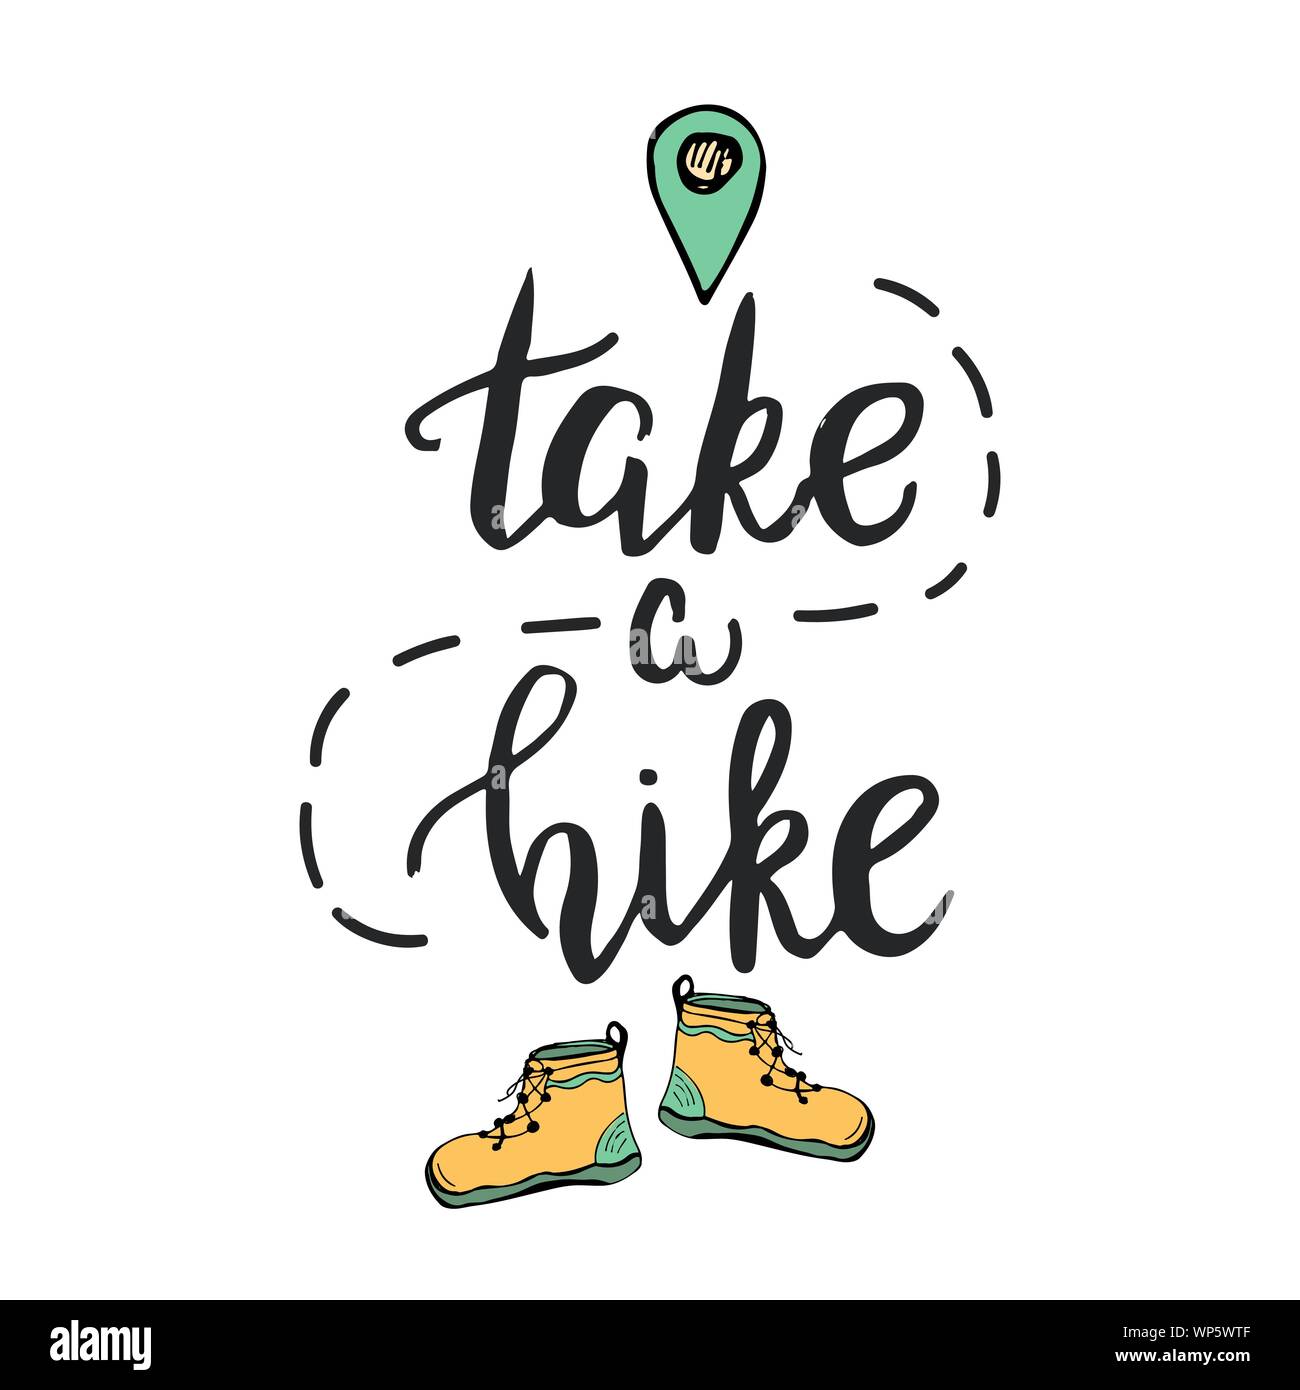 Take a hike Stock Vector Images - Alamy